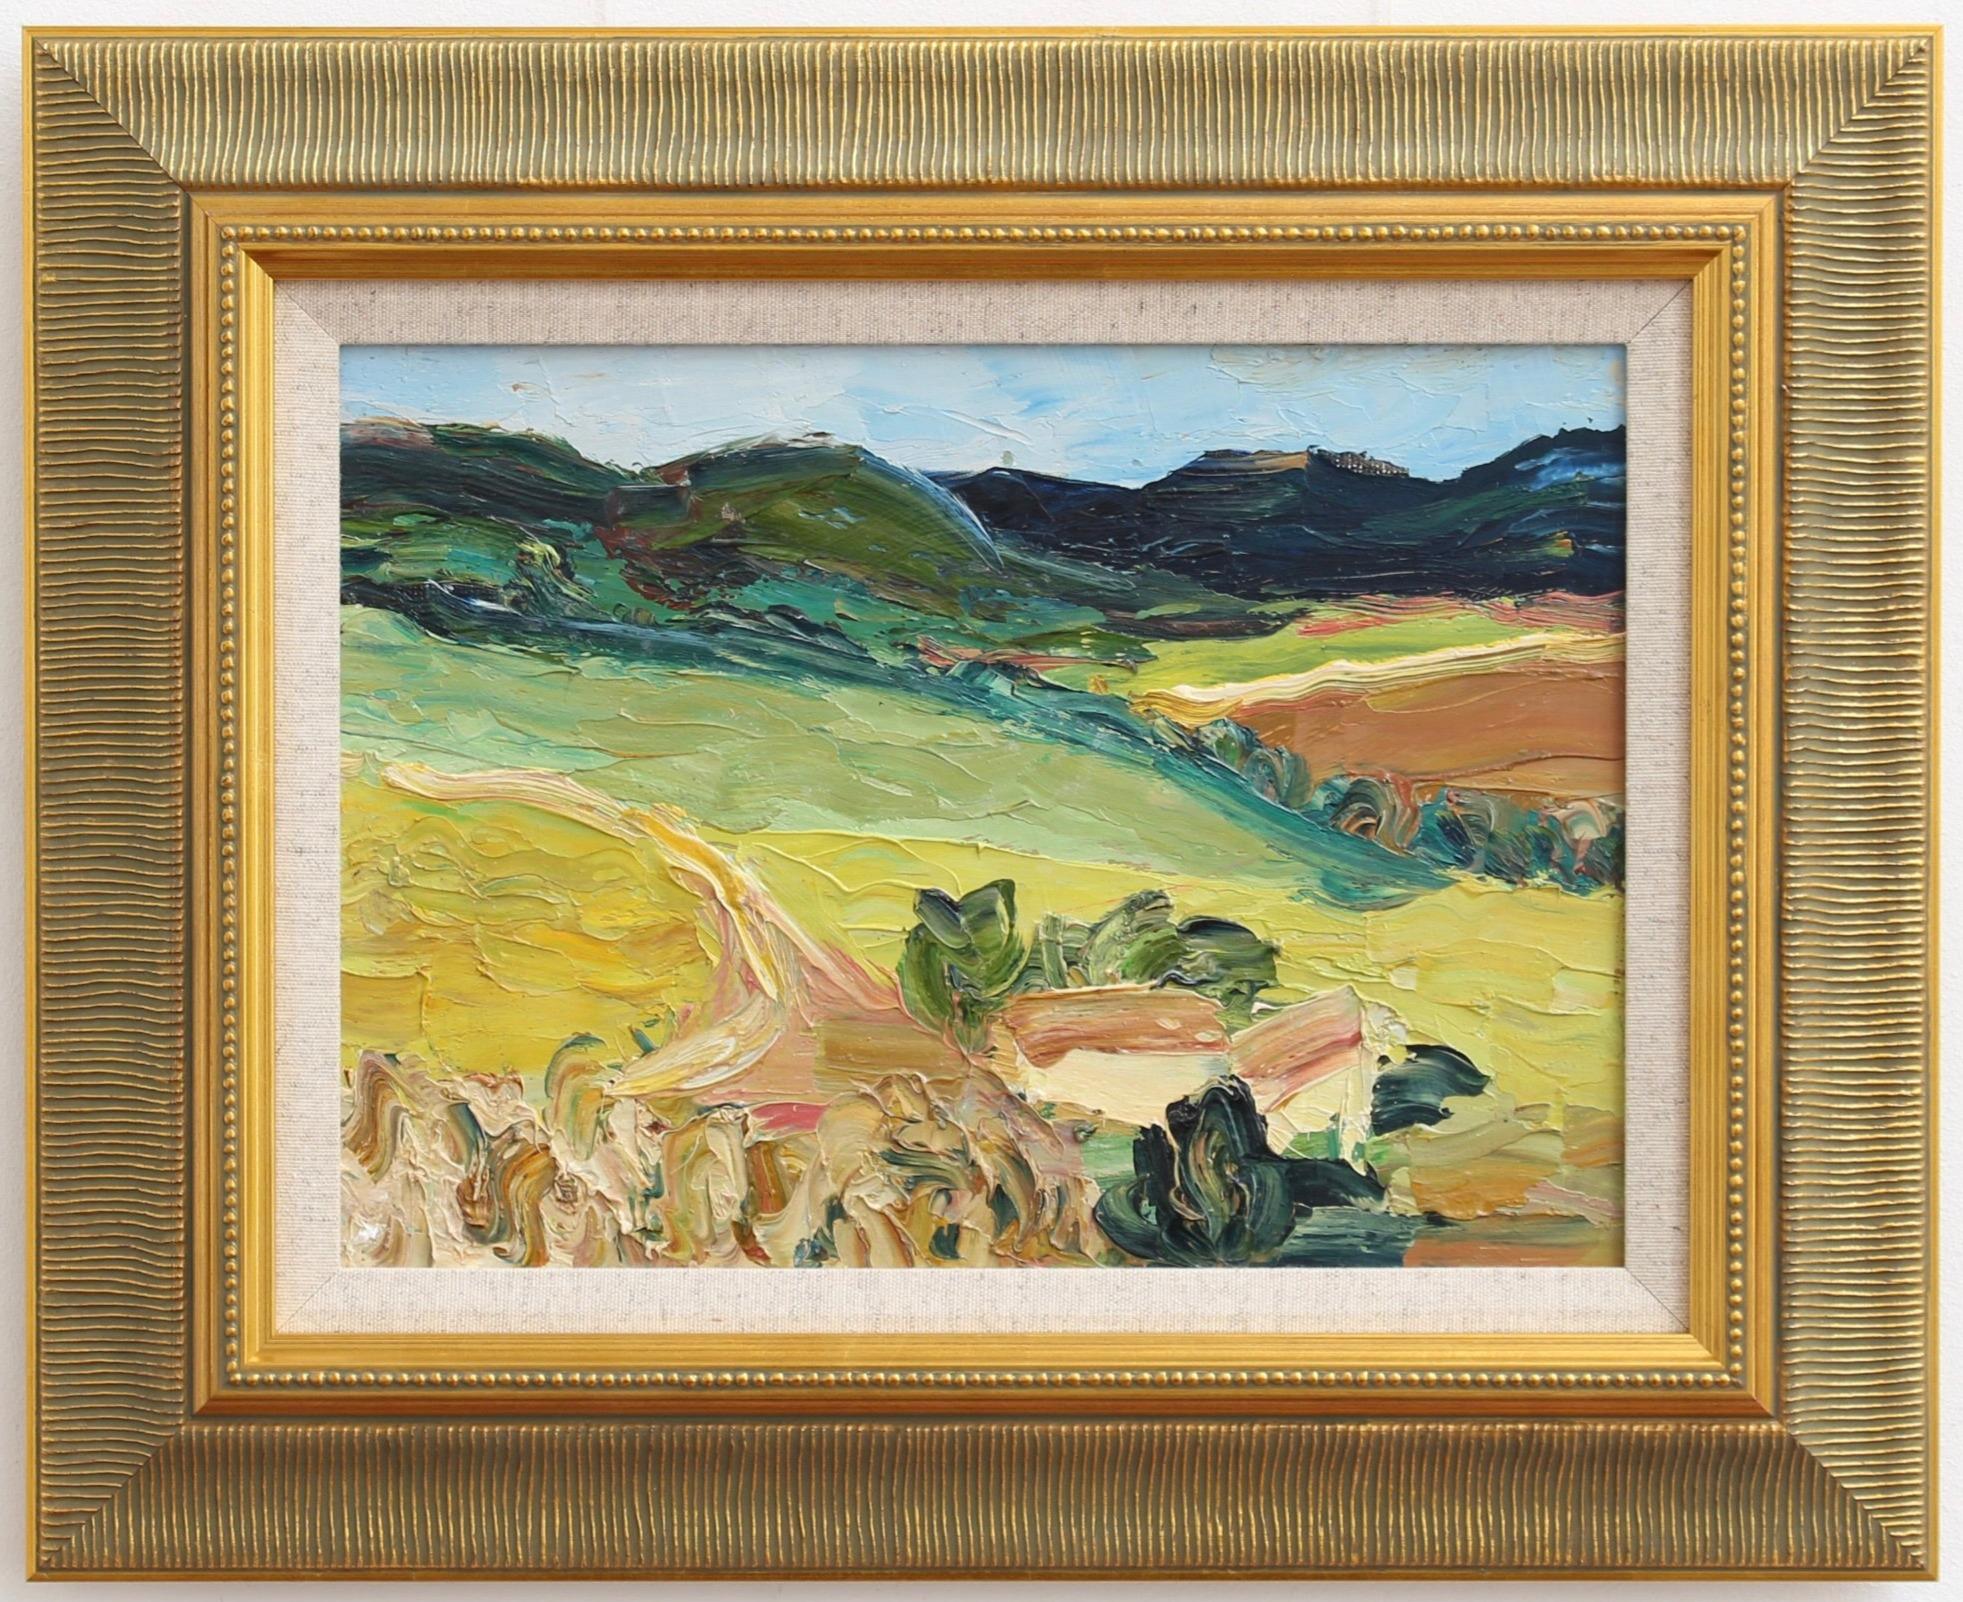 'Vista of Provence', oil on board, by Anna Costa (circa 1960s). This is a vibrant landscape painted by the artist in rich colours in an Impressionist style using a thick impasto technique. As a result, the hills appear to roll like waves in heavy